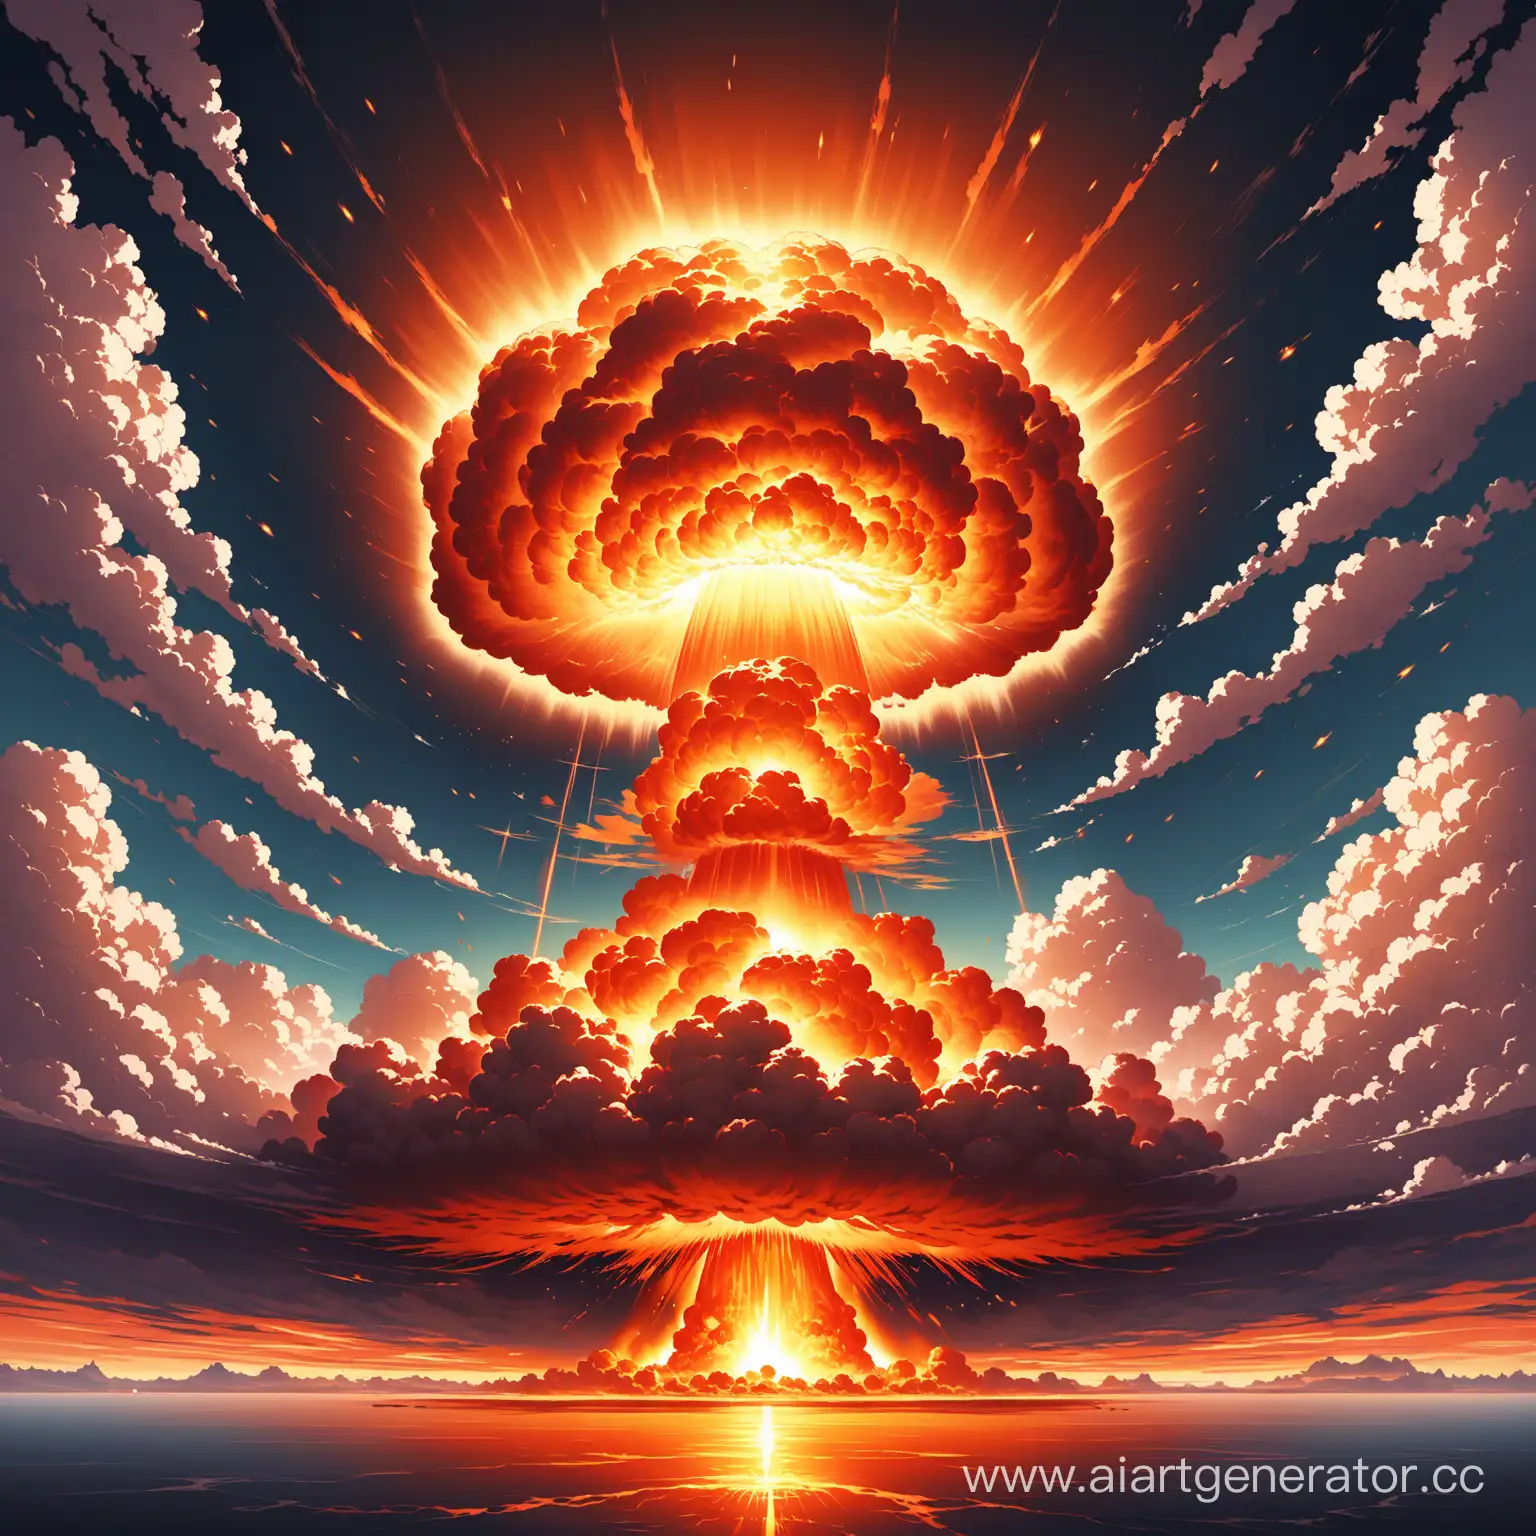 Epic-Nuclear-Explosion-Art-Dazzling-Display-of-Cataclysmic-Power